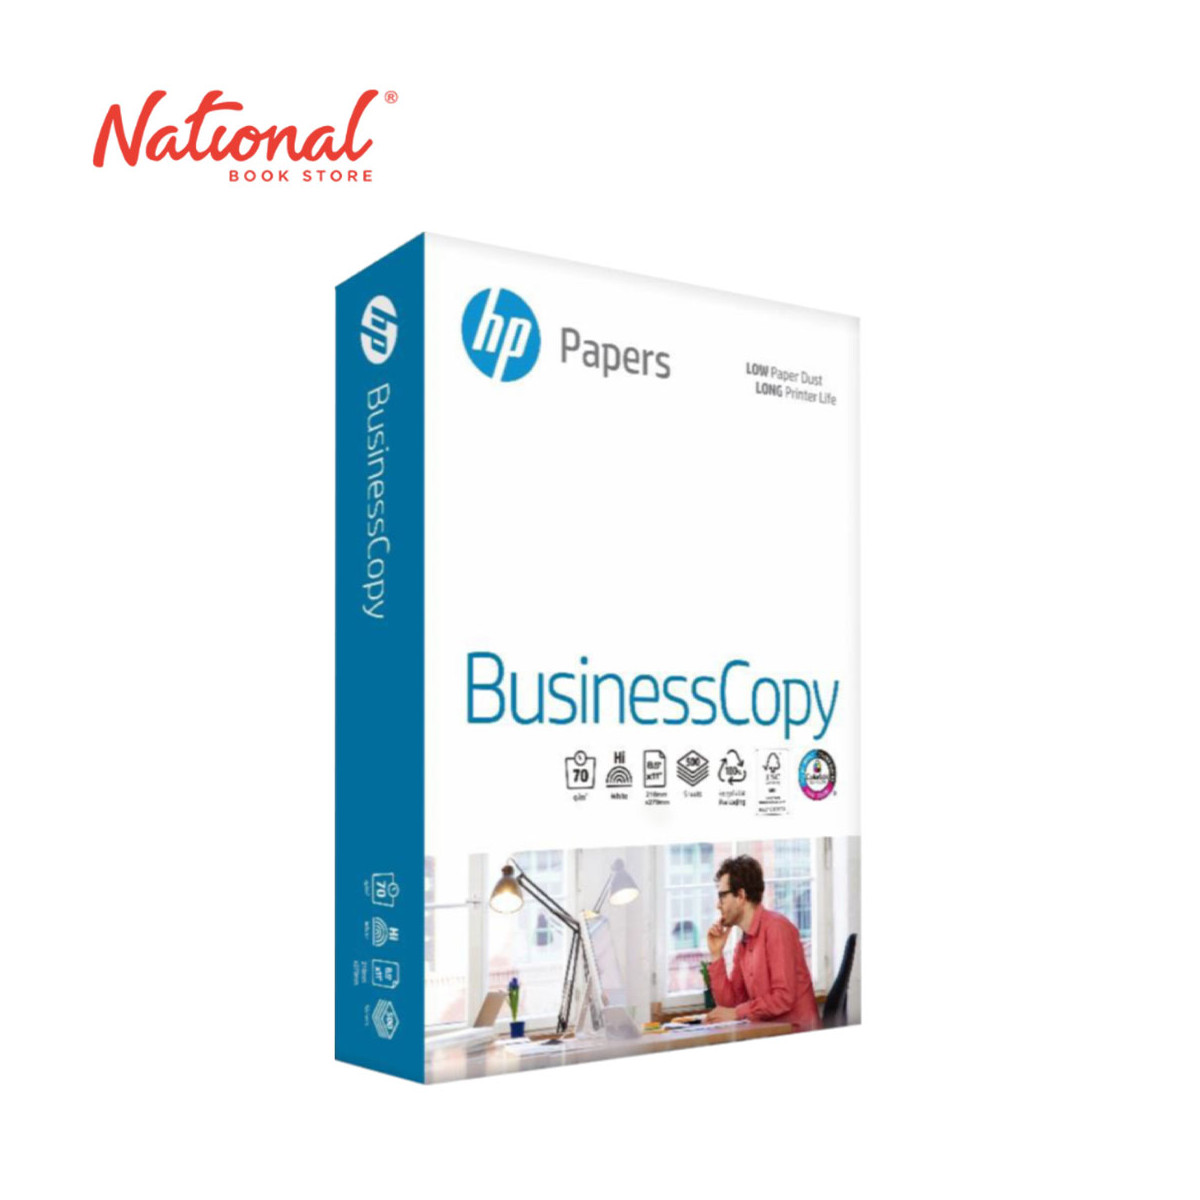 HP Copy Paper A4 70gsm - Office Paper Supplies